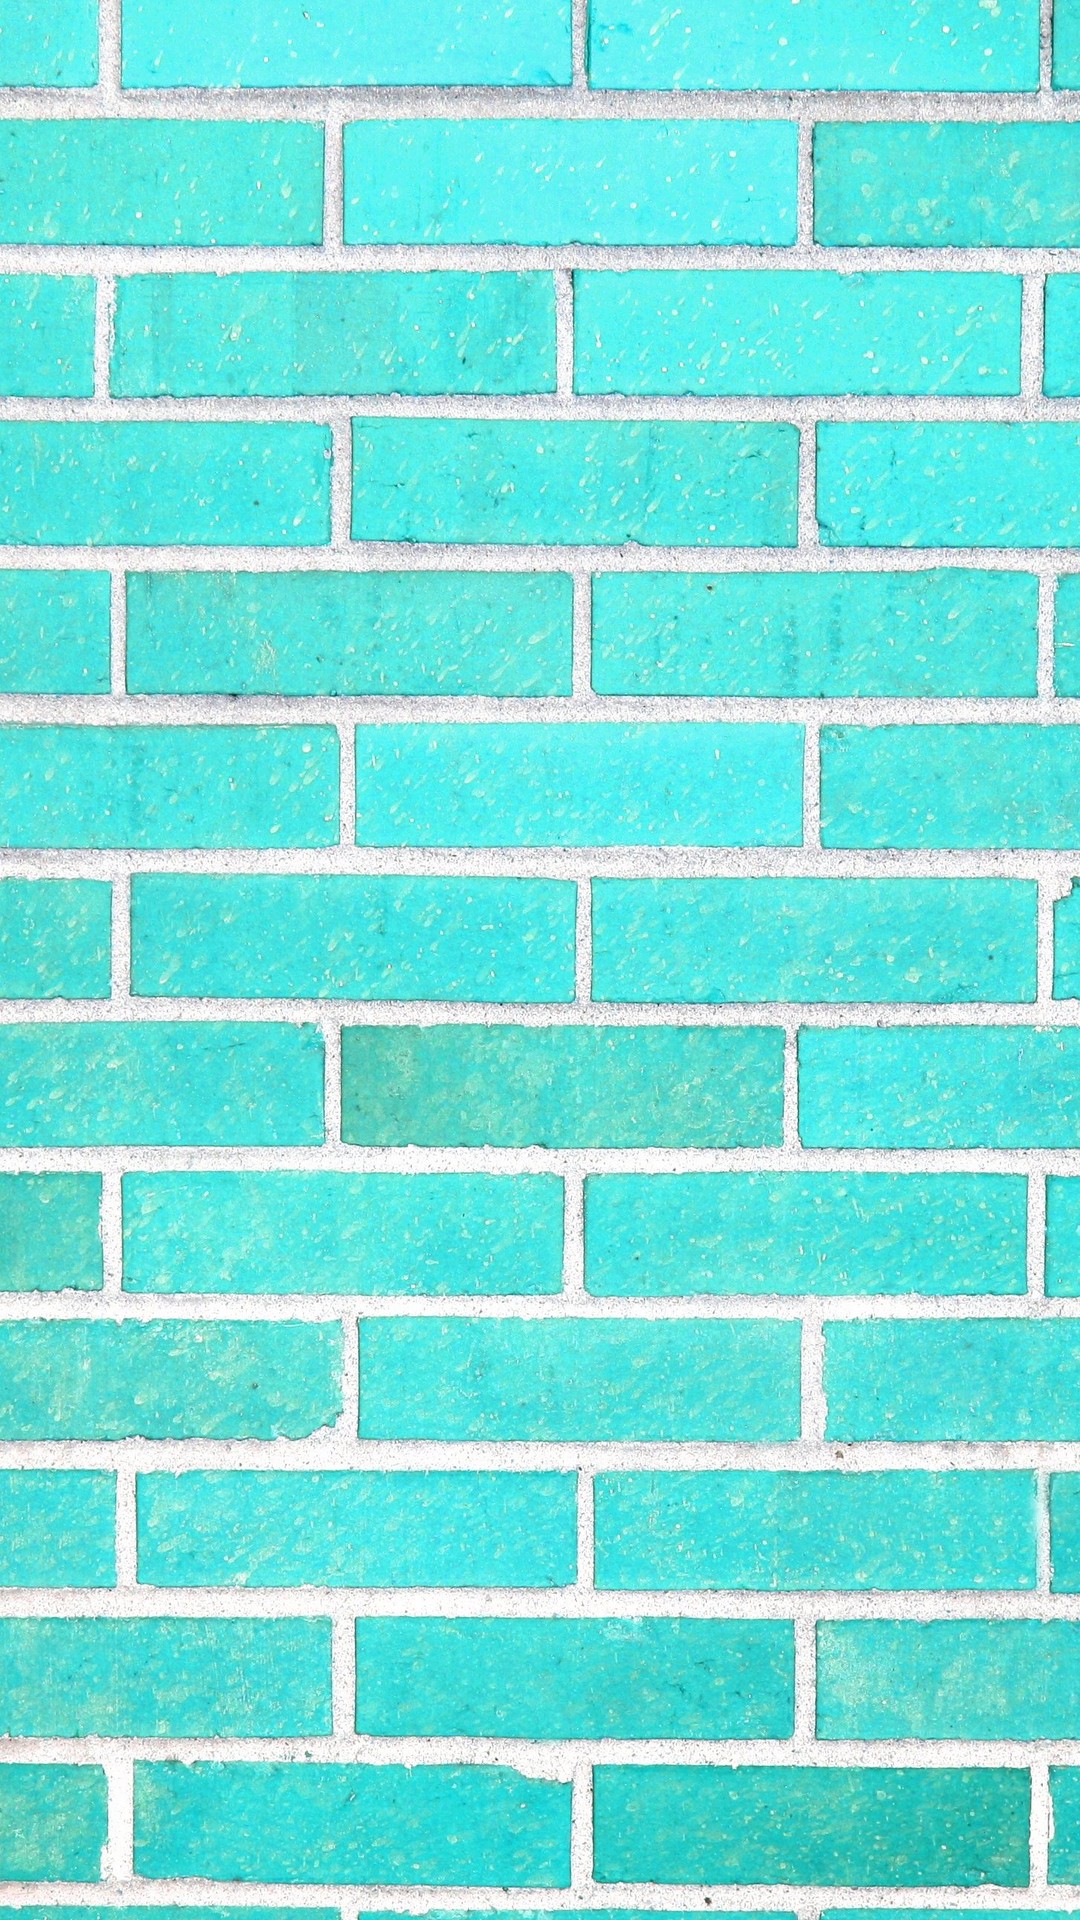 Teal iPhone Wallpapers with image resolution 1080x1920 pixel. You can use this wallpaper as background for your desktop Computer Screensavers, Android or iPhone smartphones